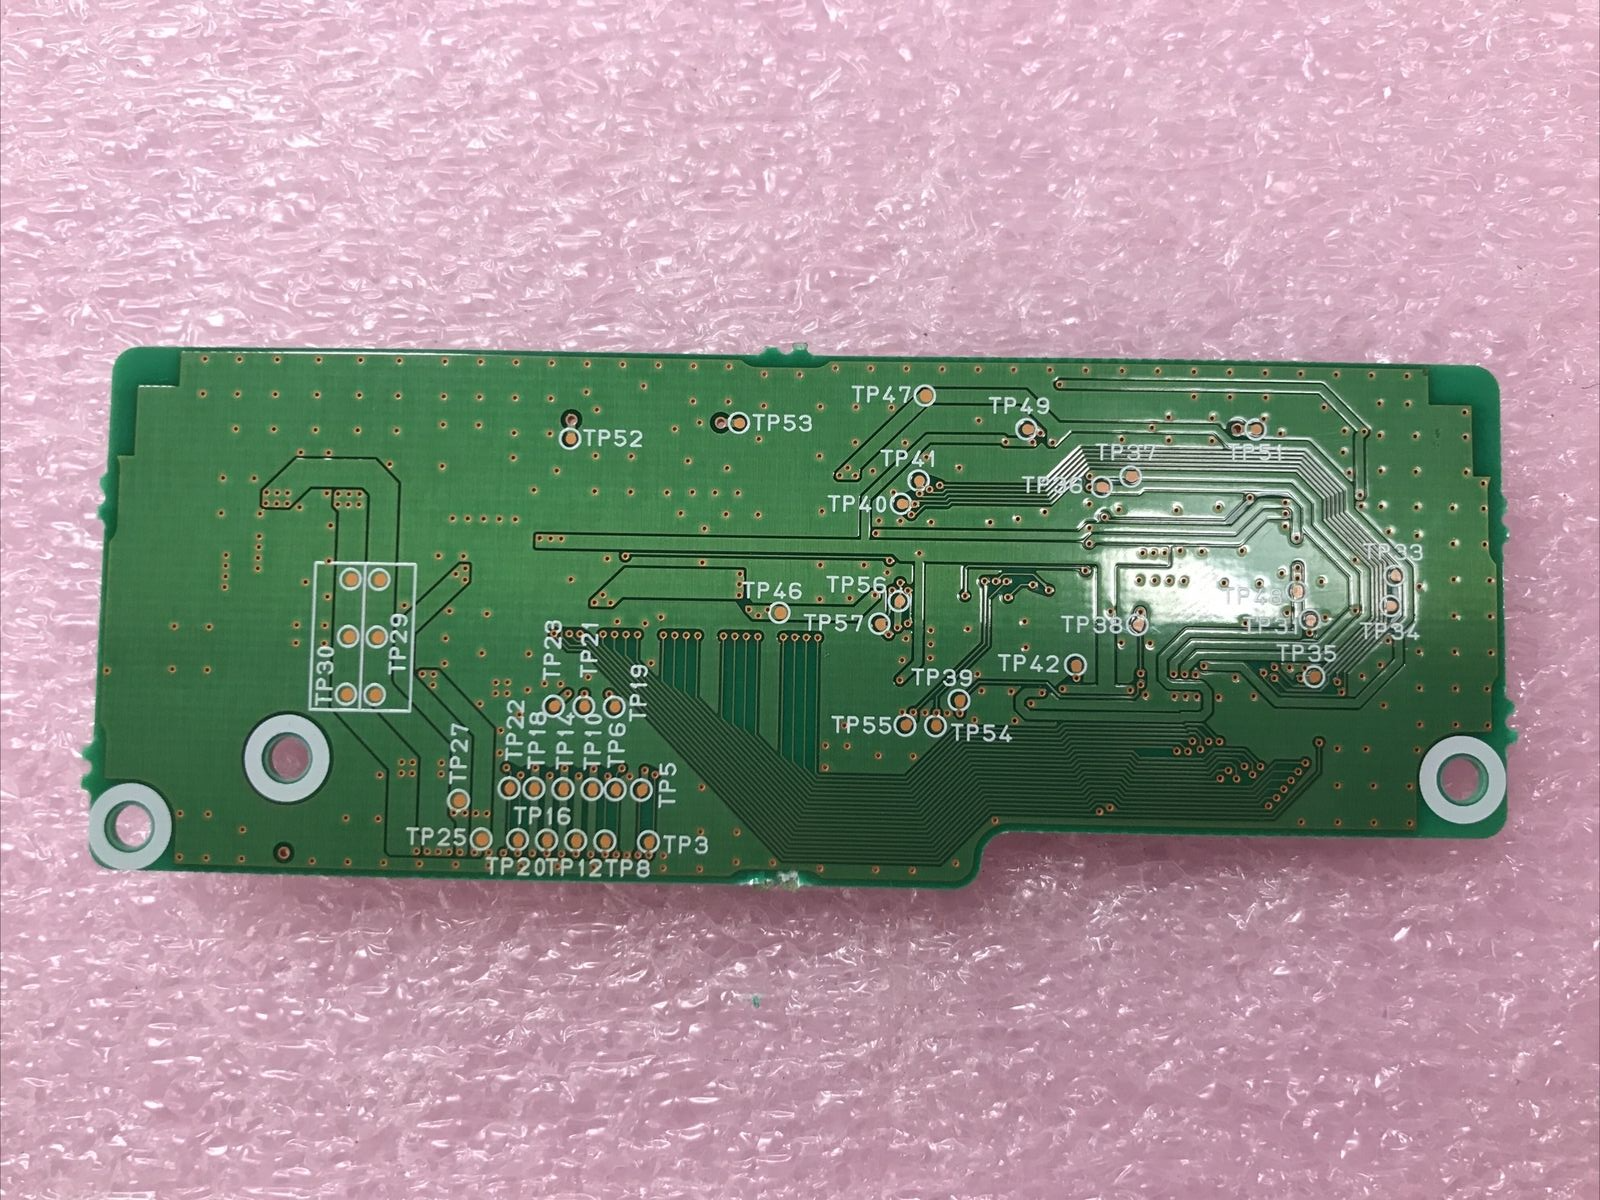 CASIO 1PC LCD display board PCB-CHT01-P01